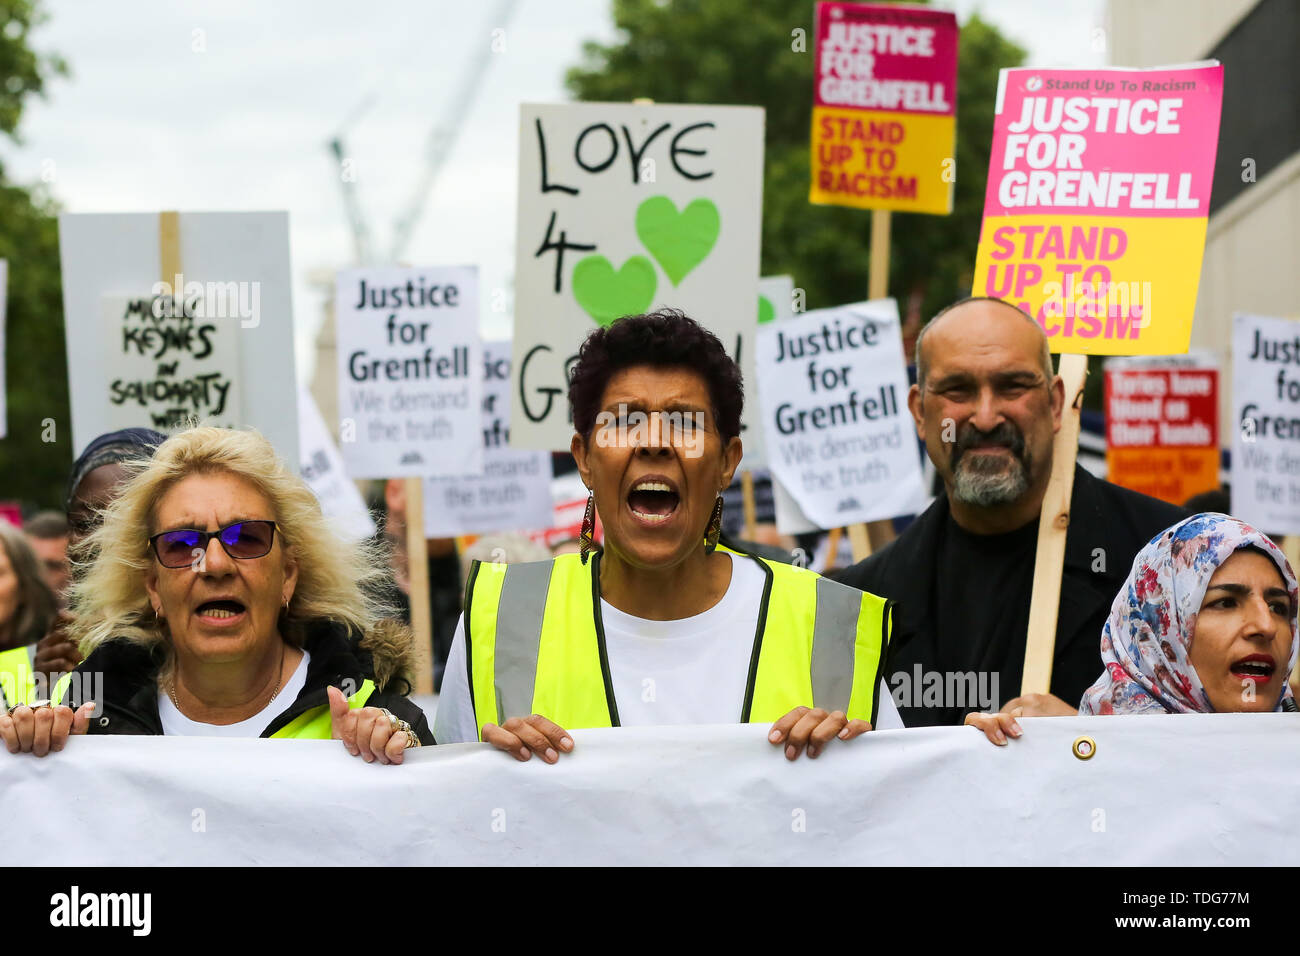 Campaigners shout slogans during the Justice for Grenfell Solidarity rally against the lack of action by the Government following the Grenfell Tower fire, in rehousing affected families, delays in the Public Inquiry, tower blocks still covered in flammable cladding, soil contamination and the performance of Royal Borough of Kensington and Chelsea. On 14 June 2017, just before 1:00 am a fire broke out in the kitchen of the fourth floor flat at the 24-storey residential tower block in North Kensington, West London, which took the lives of 72 people. More than 70 others were injured and 223 peopl Stock Photo